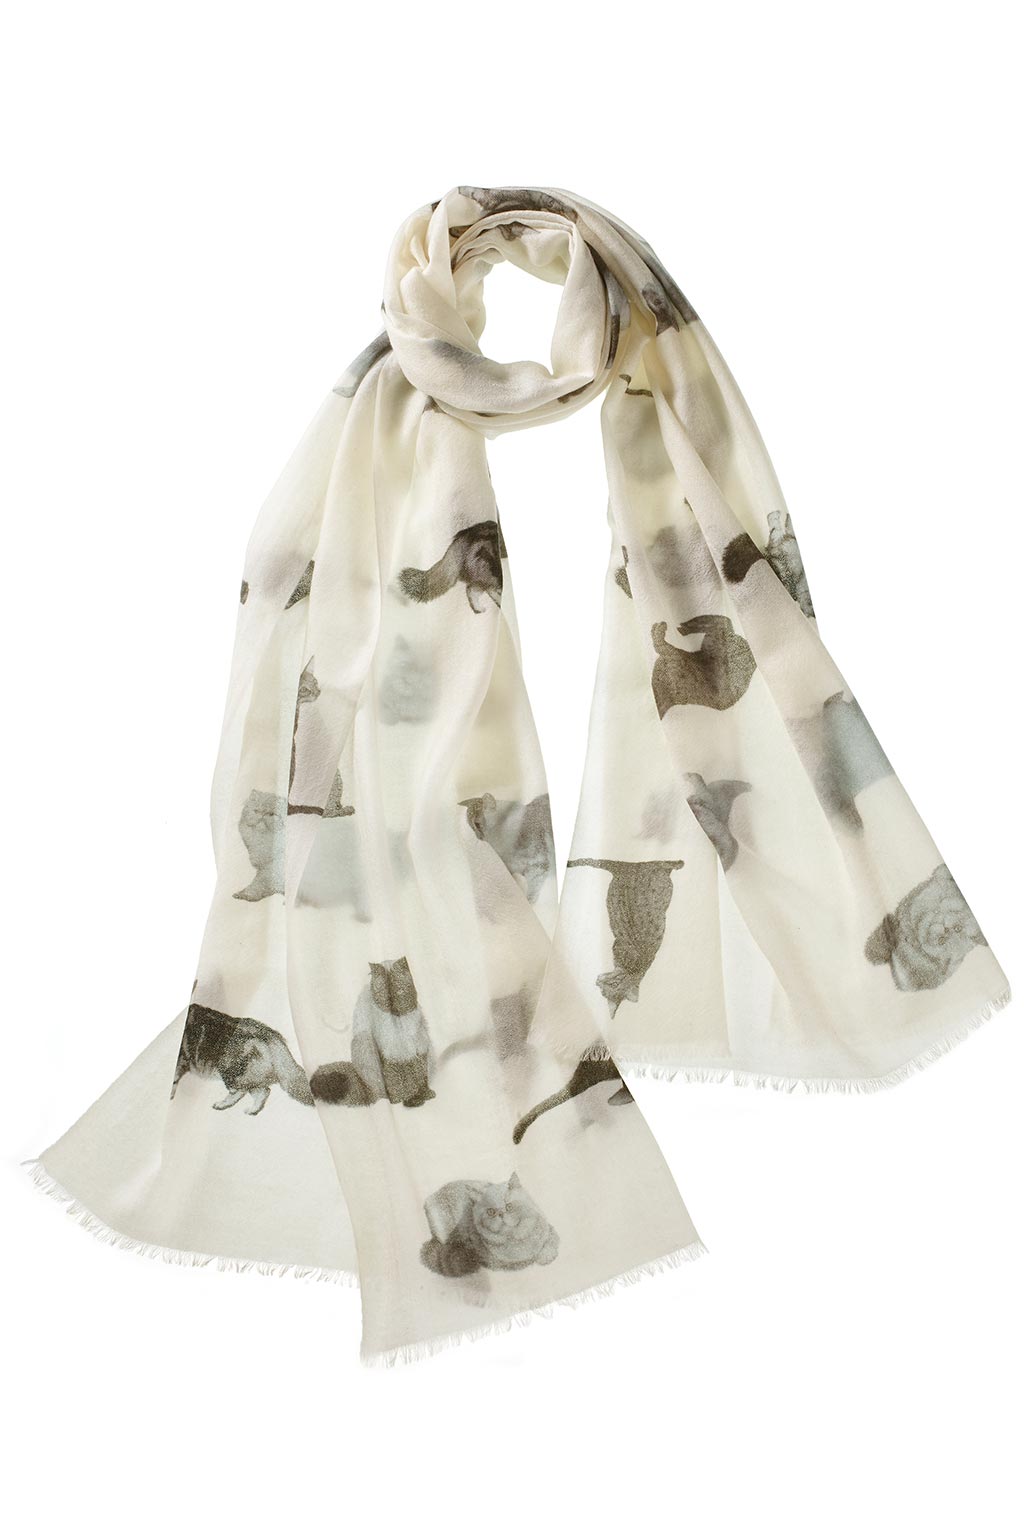 Alpine Cashmere's Featherweight Cashmere Cat Scarf in ivory